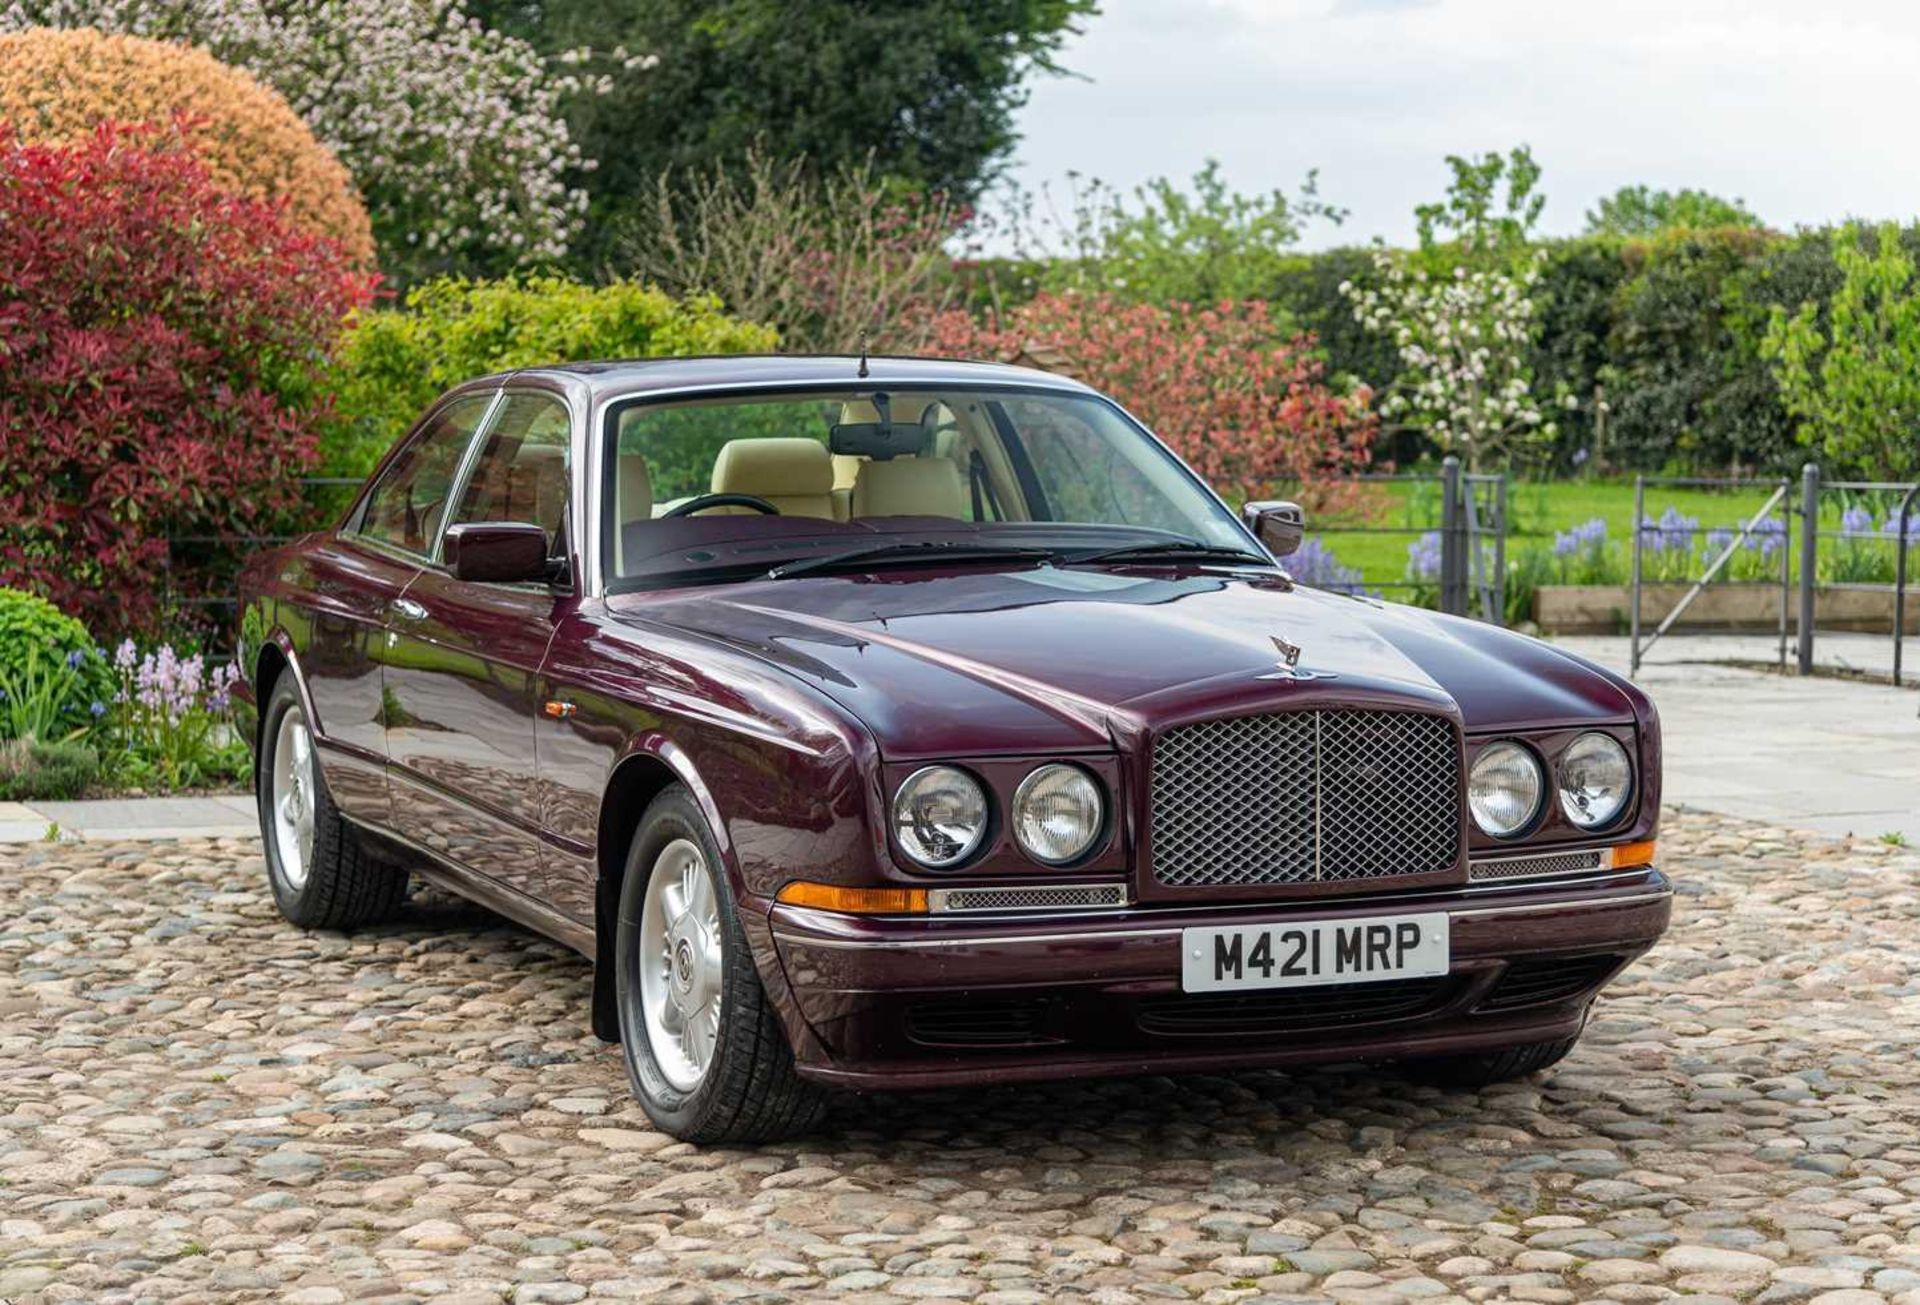 1995 Bentley Continental R Former Bentley demonstrator and subsequently owned by business tycoon Sir